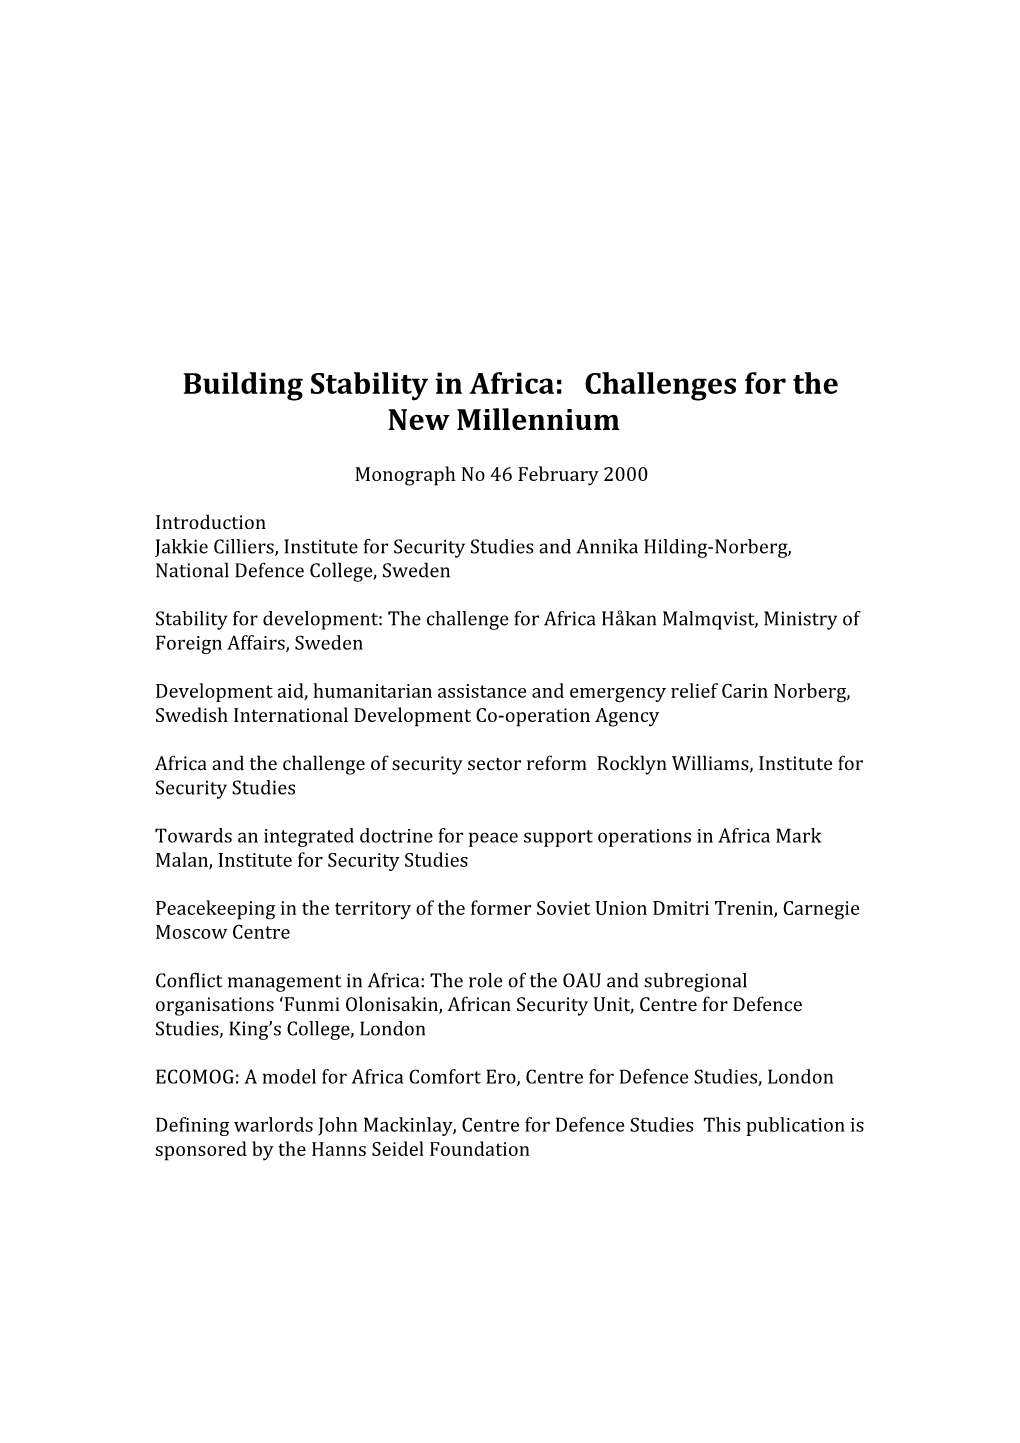 Building Stability in Africa: Challenges for the New Millennium